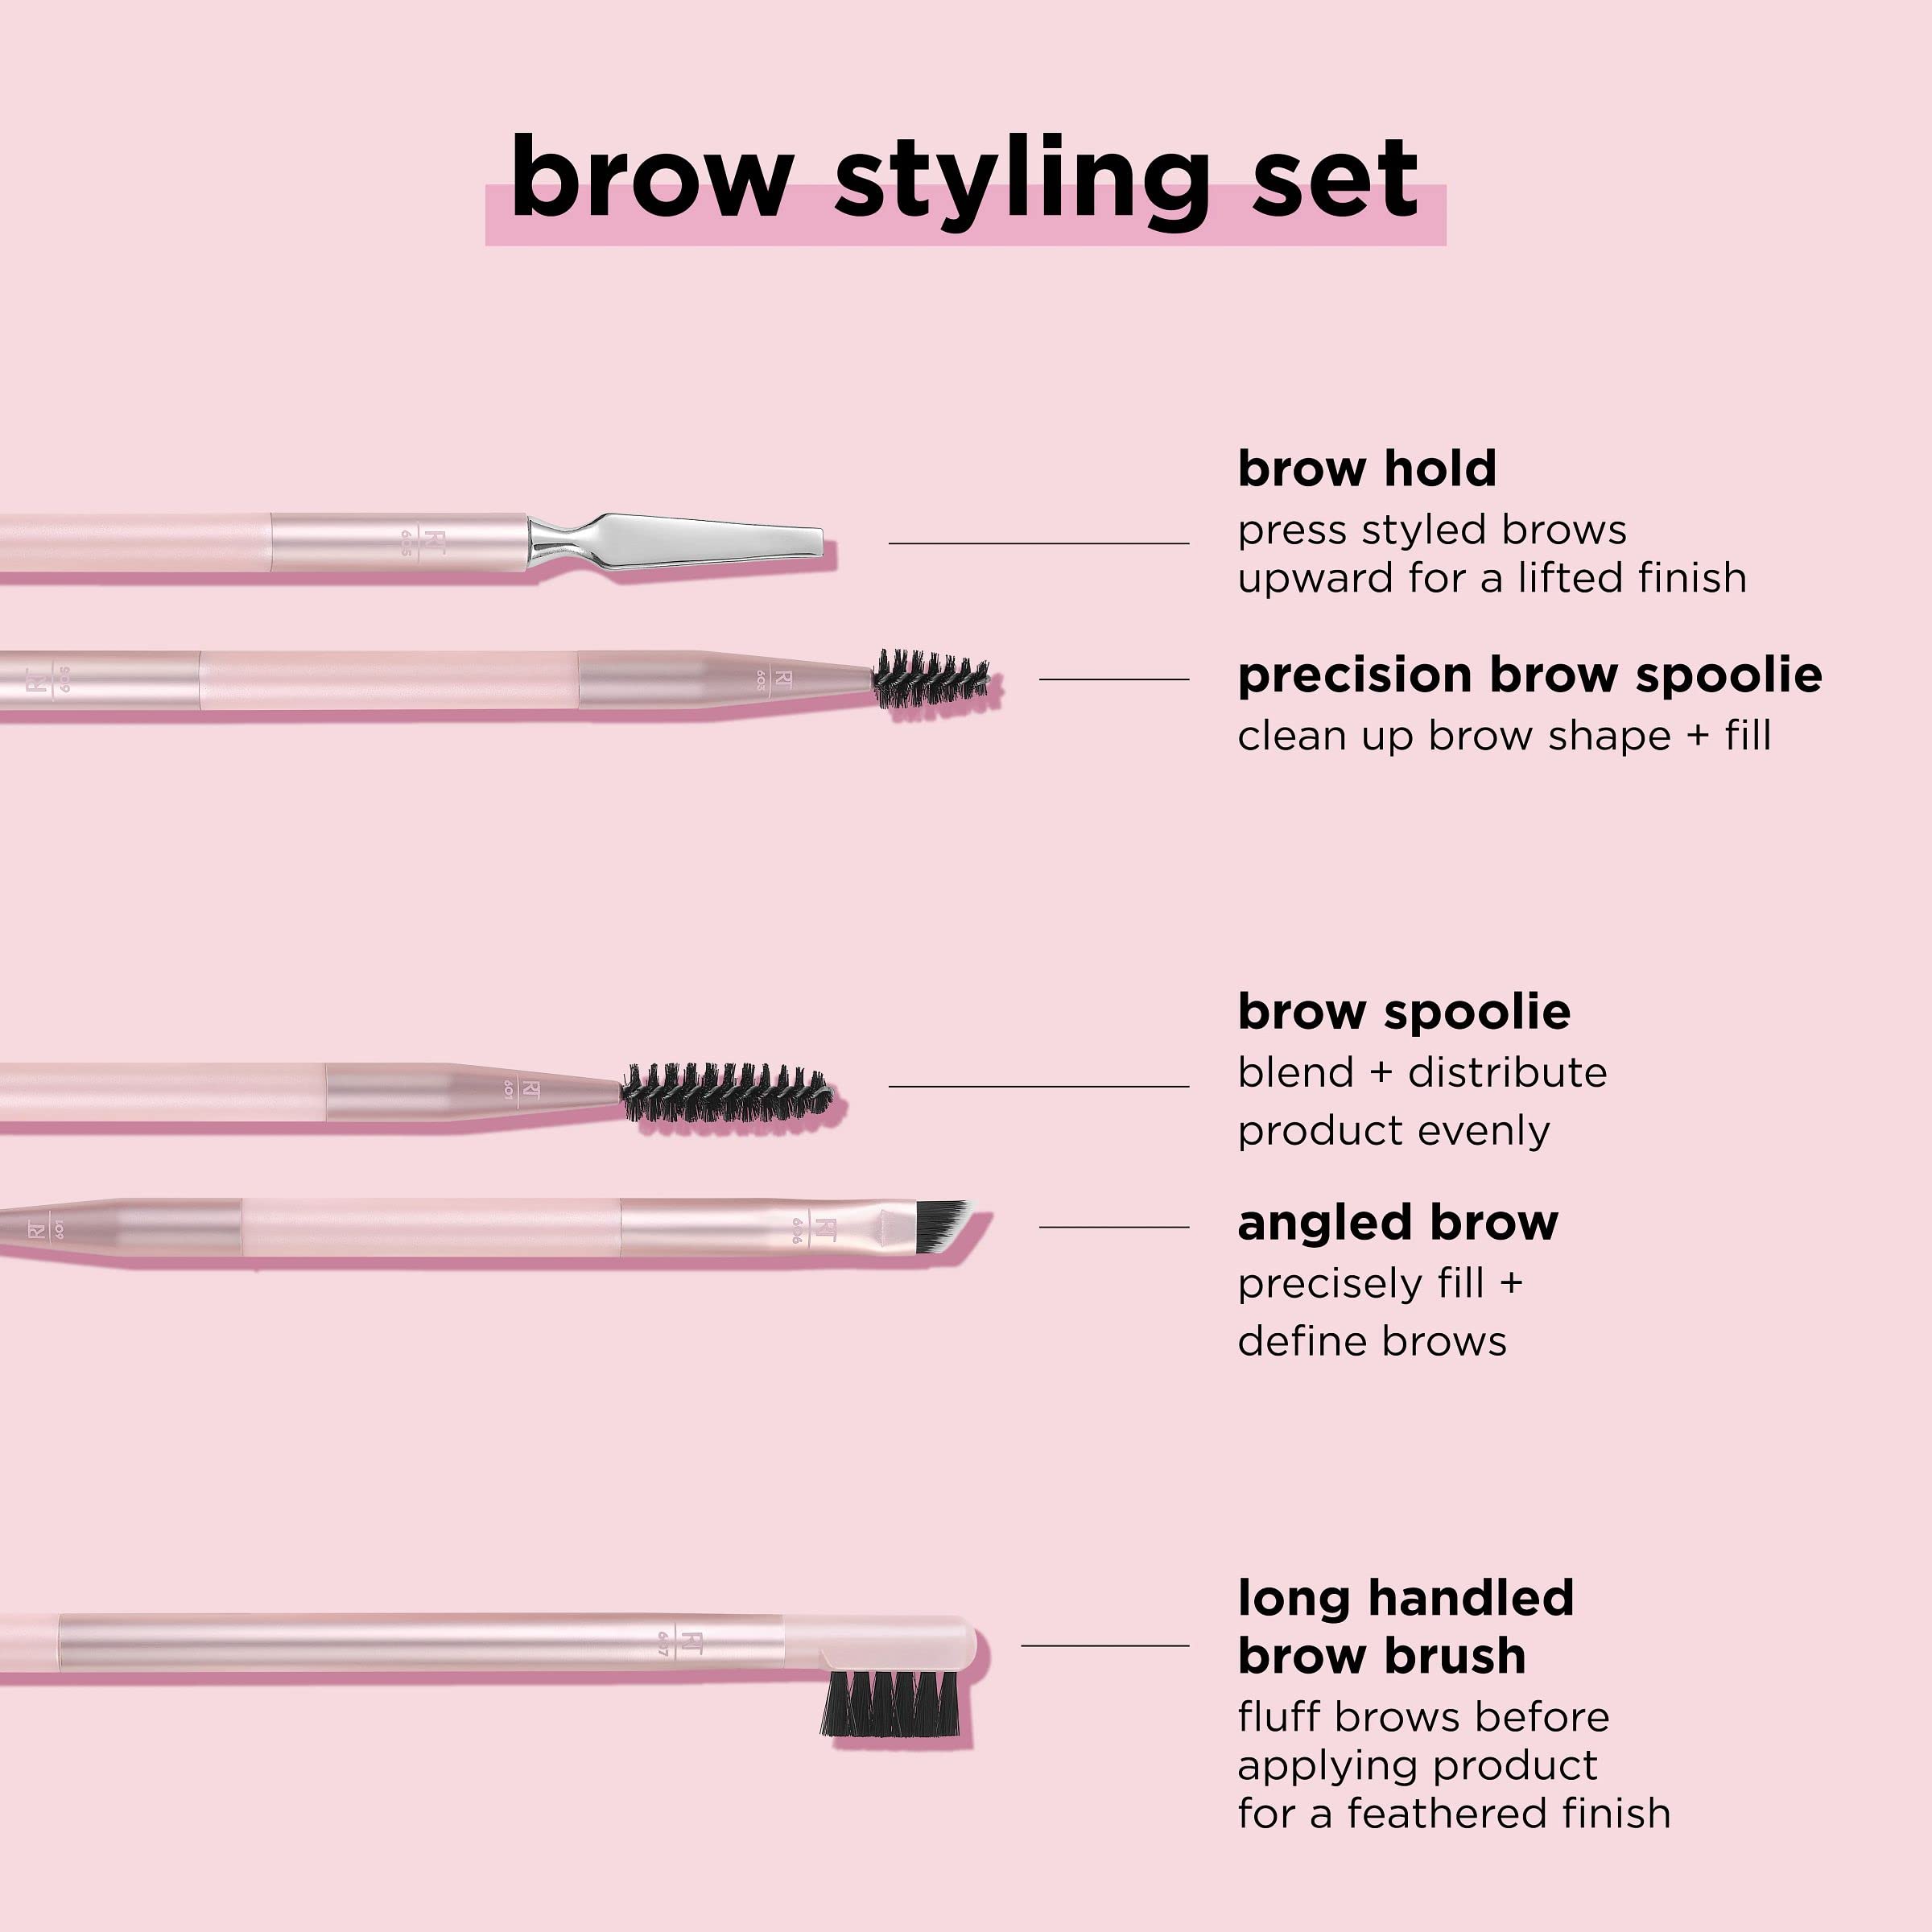 Real Techniques Brow Styling Set, For Lifting Brows, Fill & Style, Dual-ended Makeup Brushes, Full Kit for Eyebrows, Get Full, Laminated, or Natural Brows, Multiuse Tools, 3 Piece Set